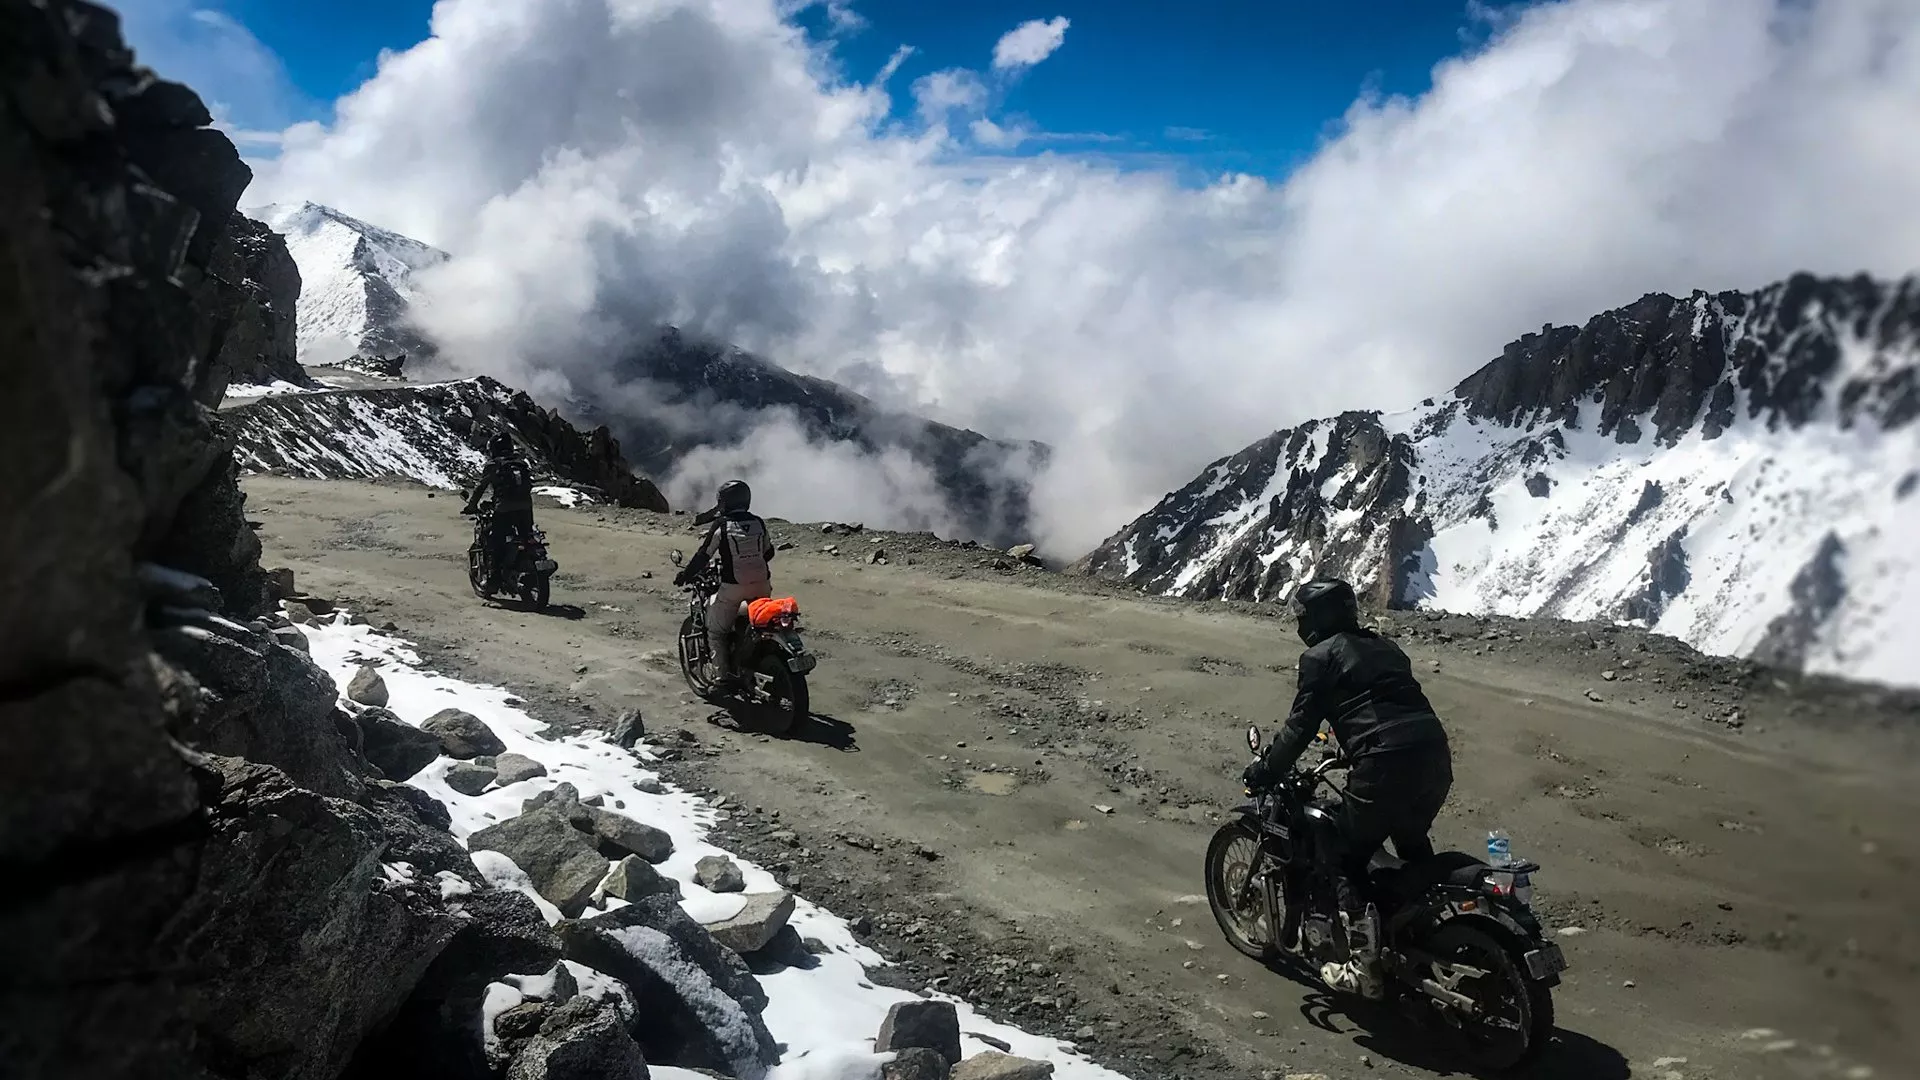 Himachal Hiking - Trekking in India, Central Asia | Motorcycles - Rated 4.1